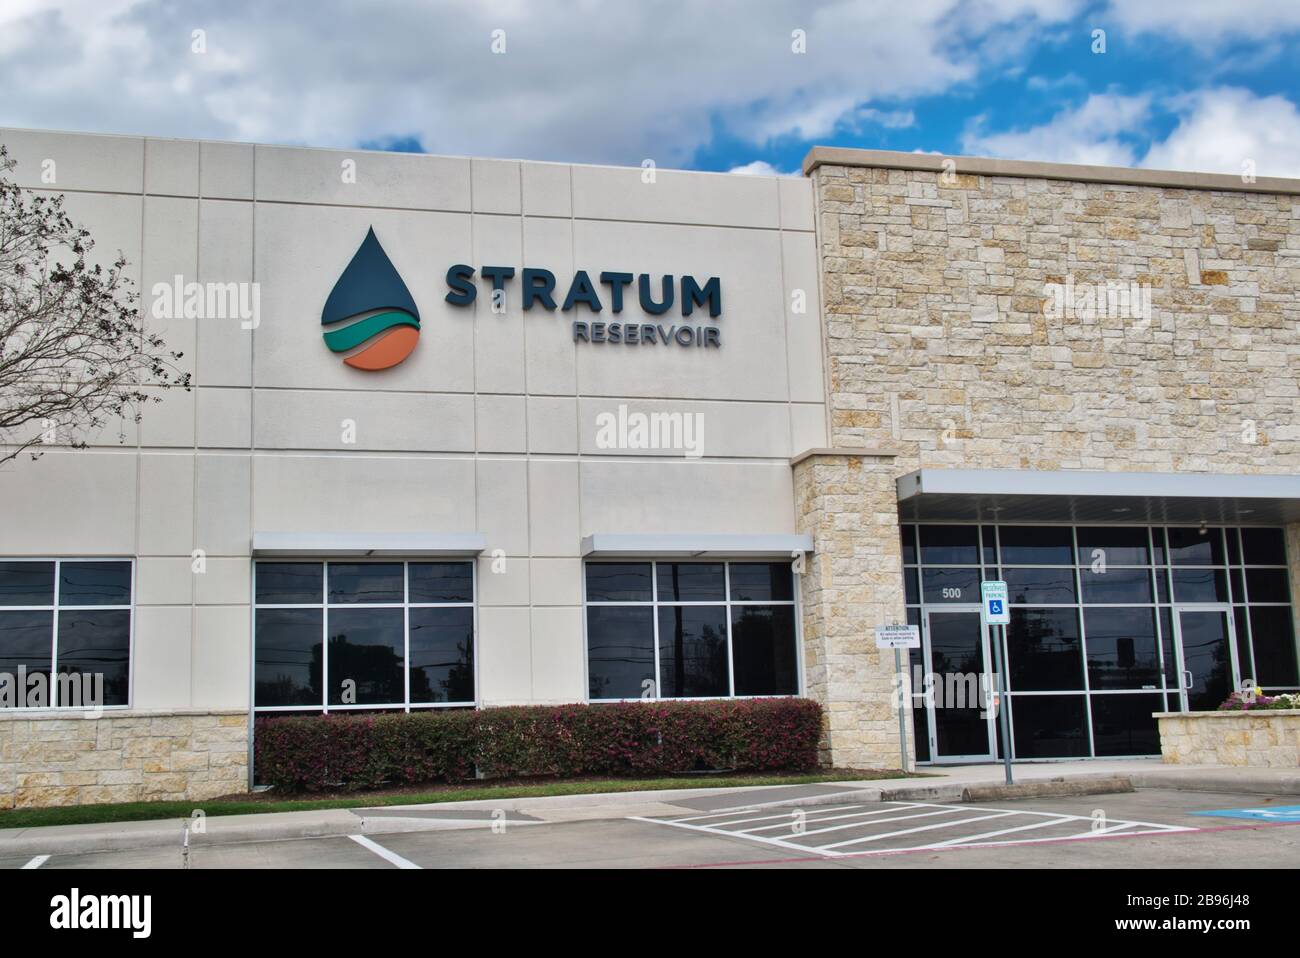 Stratum Reservoir office building exterior in Houston, TX along Beltway 8. Laboratory research center, sustainable energy resources through geoscience. Stock Photo